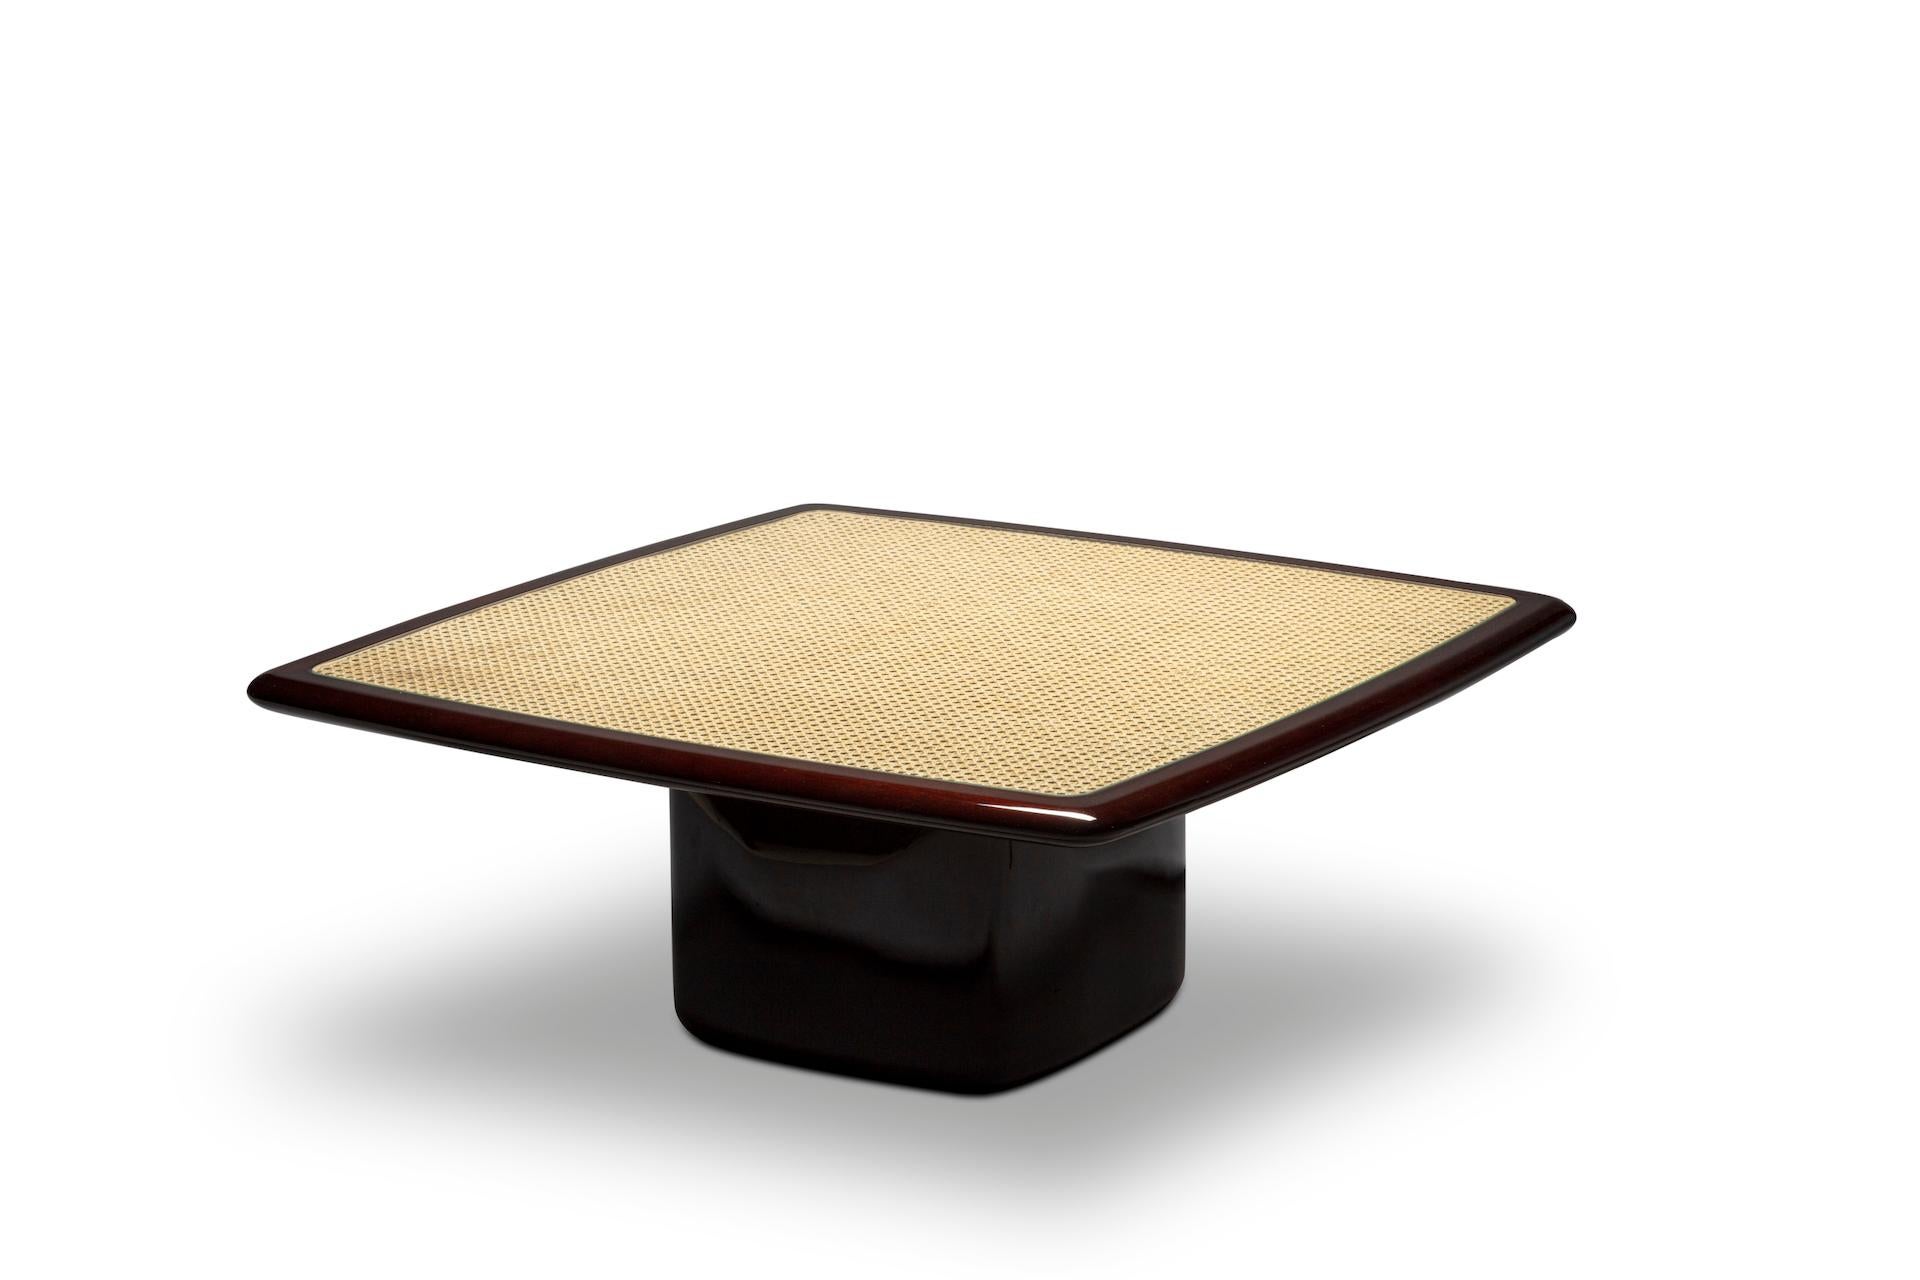 European Contemporary Low Nesting Tables, High Gloss Mahogany/Natural Cane For Sale